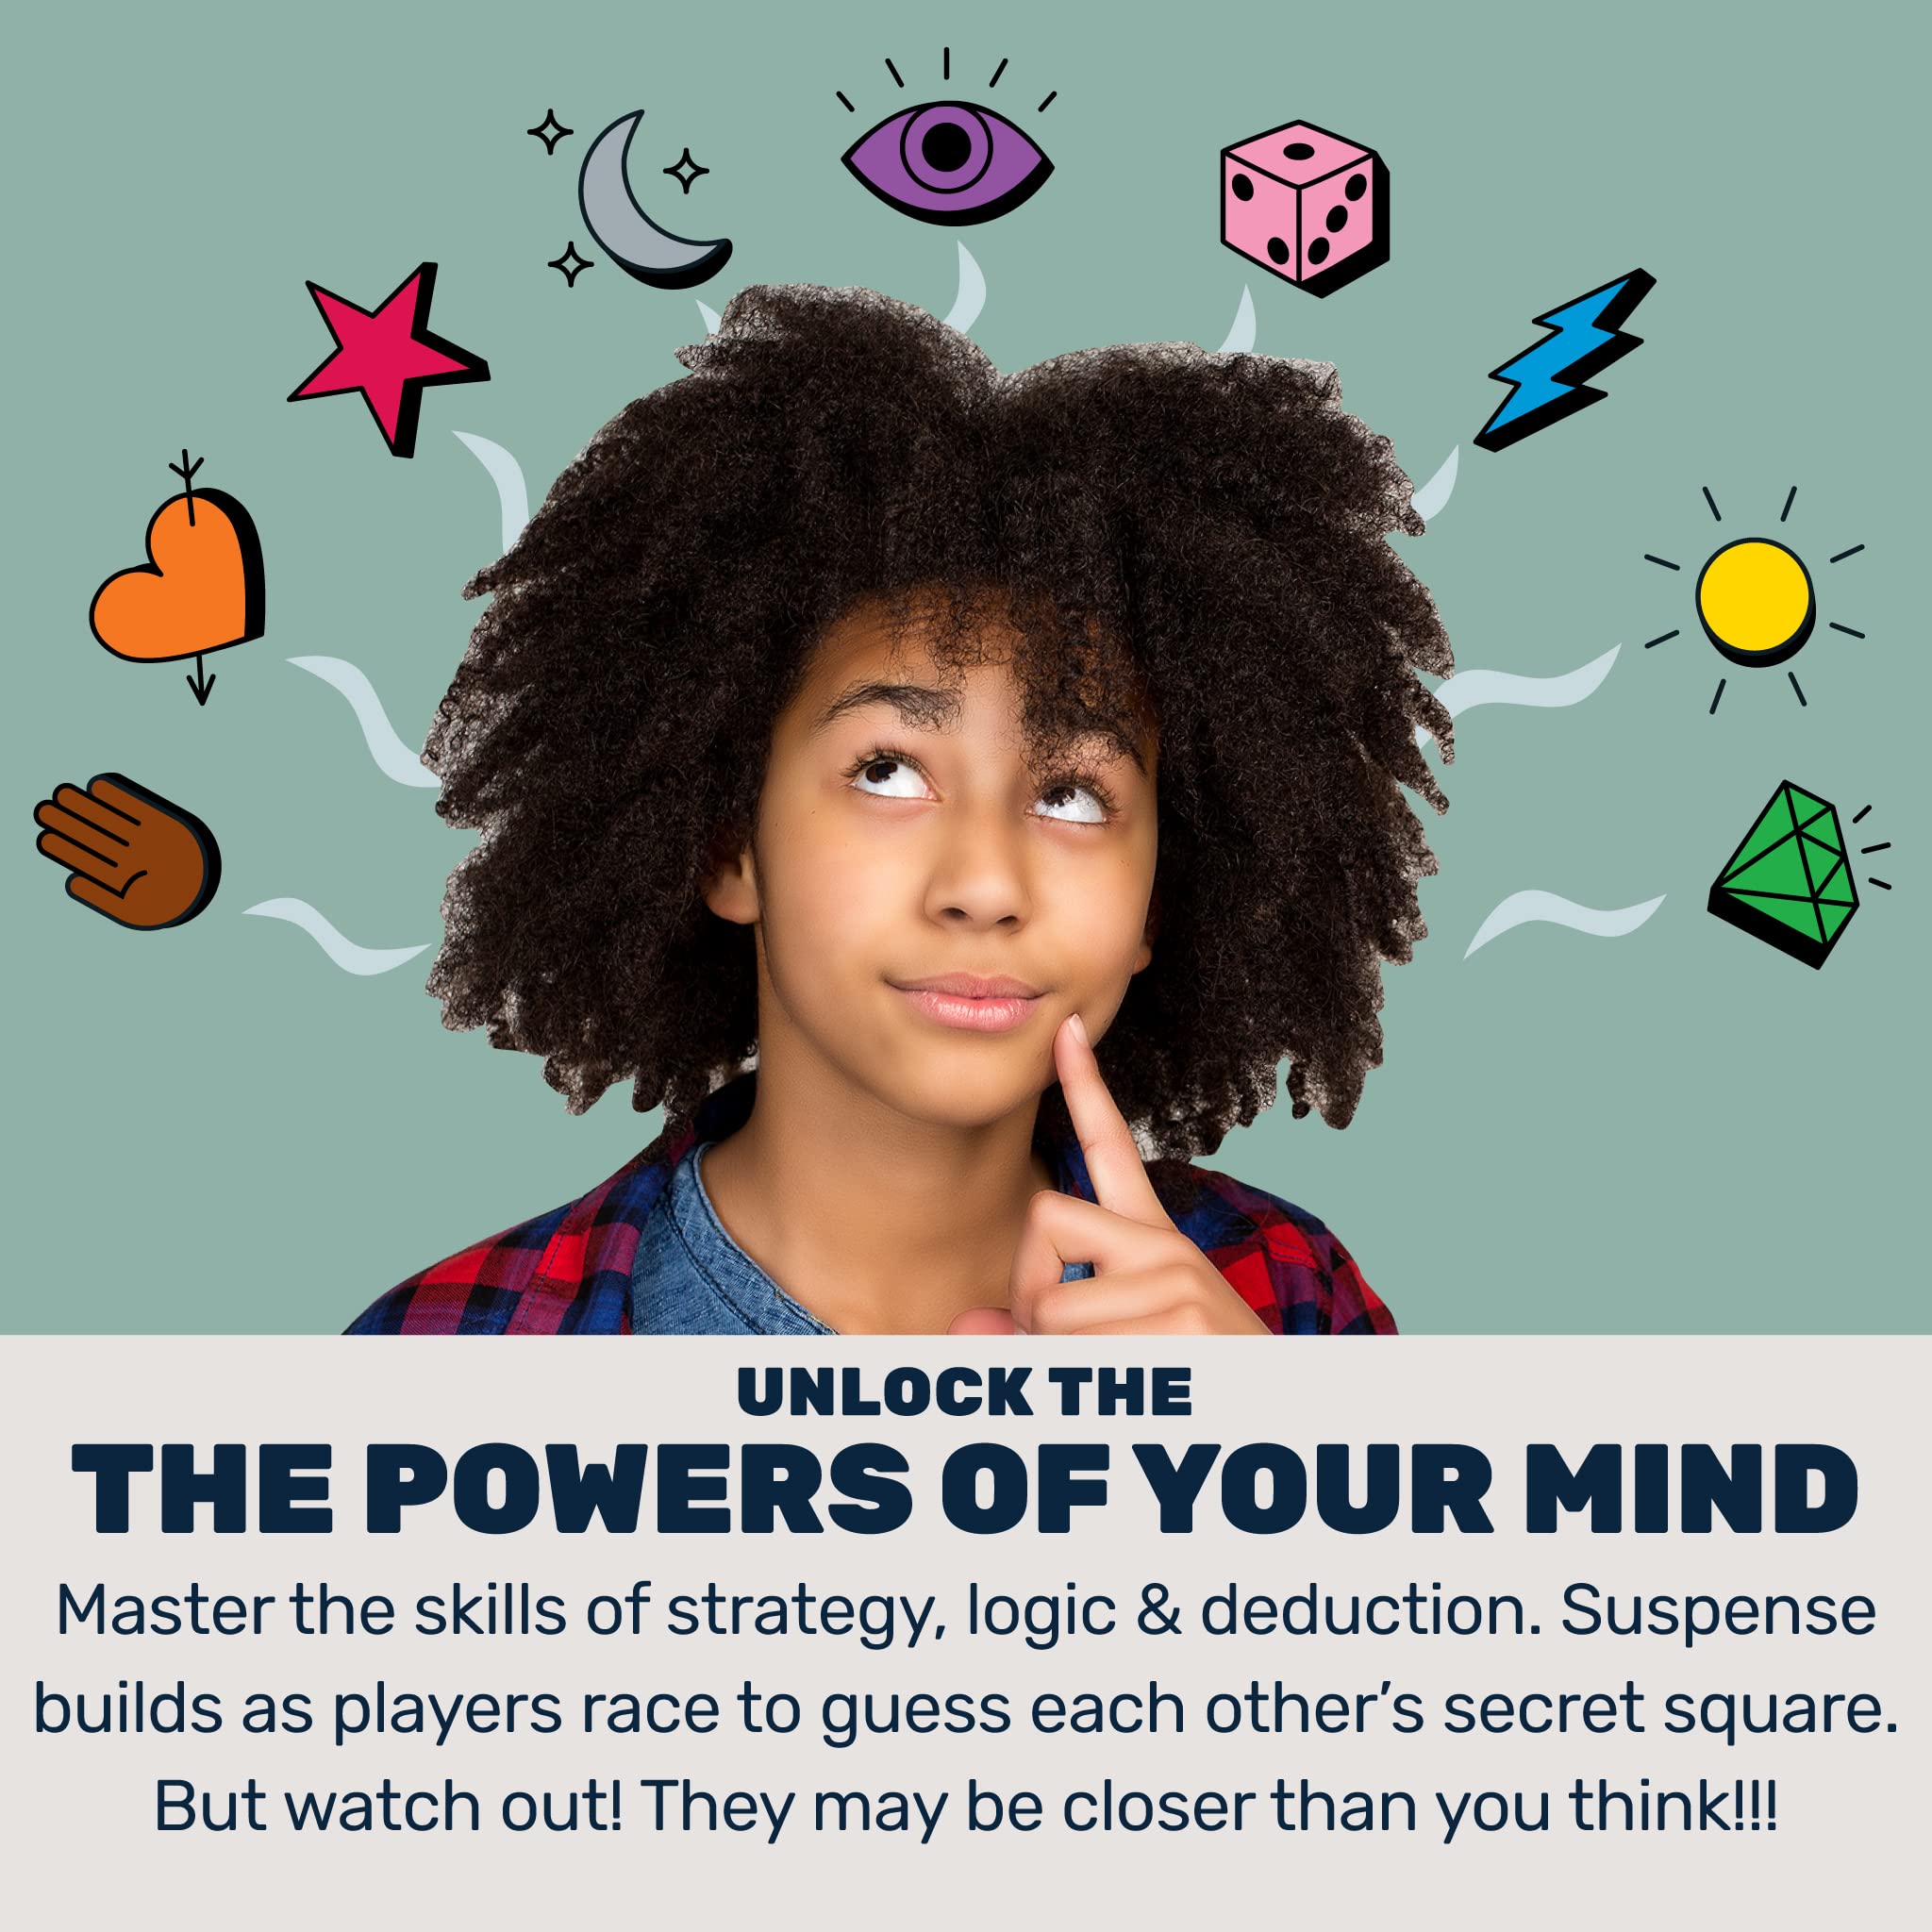 Mighty Fun! - Telepathy® Board Game - Award-Winning Strategy Board Game of Memory, Logic and Deduction for Kids, Adults and Families - 2 Person or Teams - Ages 10+